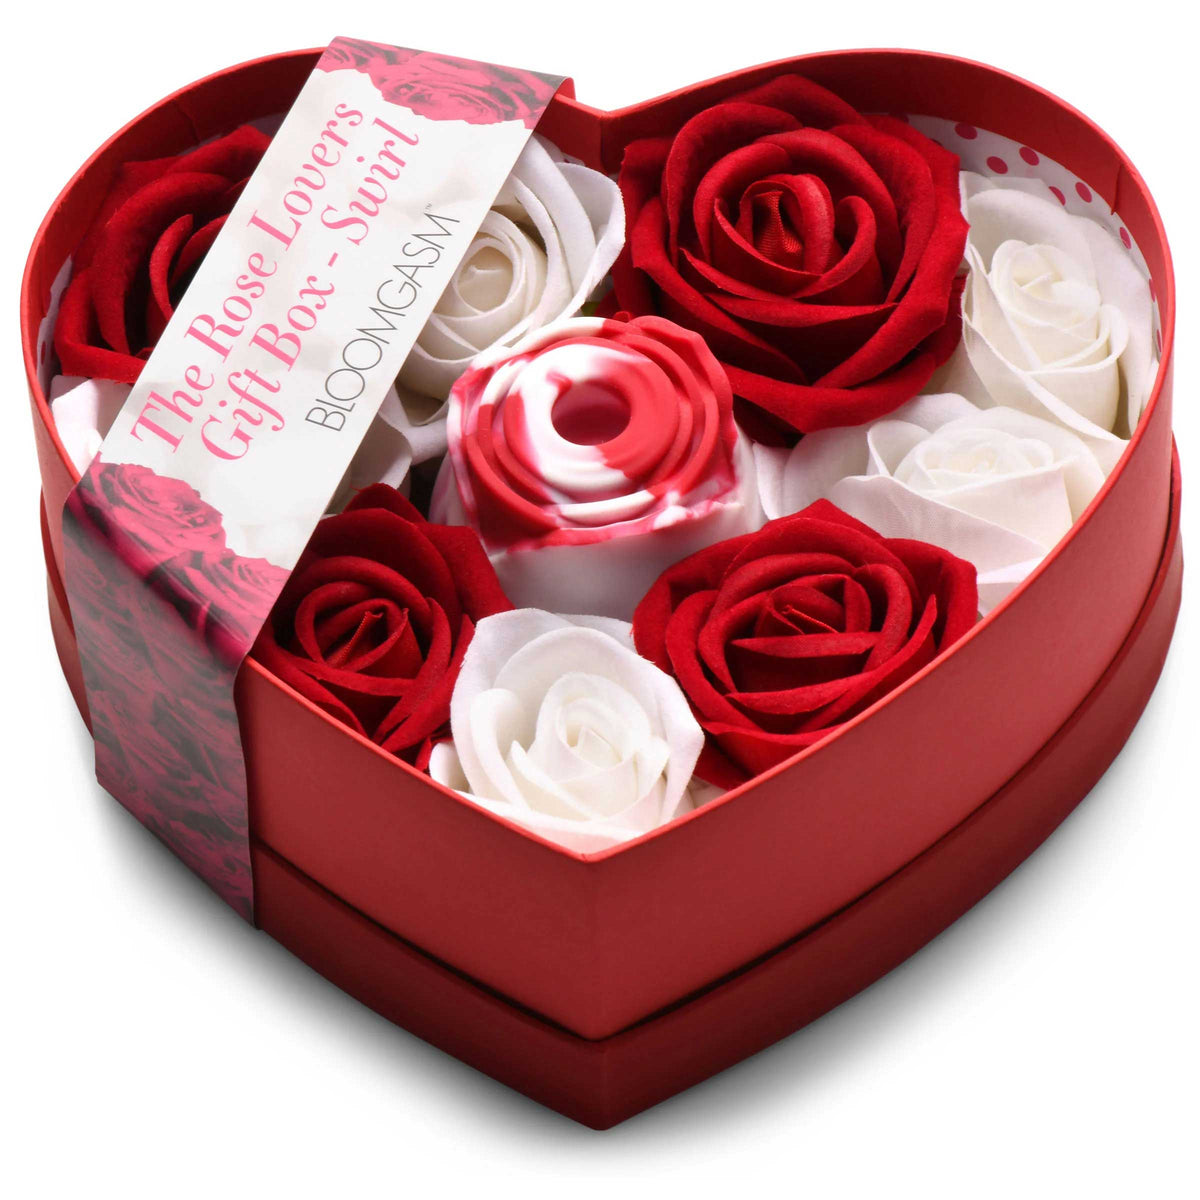 the rose lovers gift box bloomgasm swirl